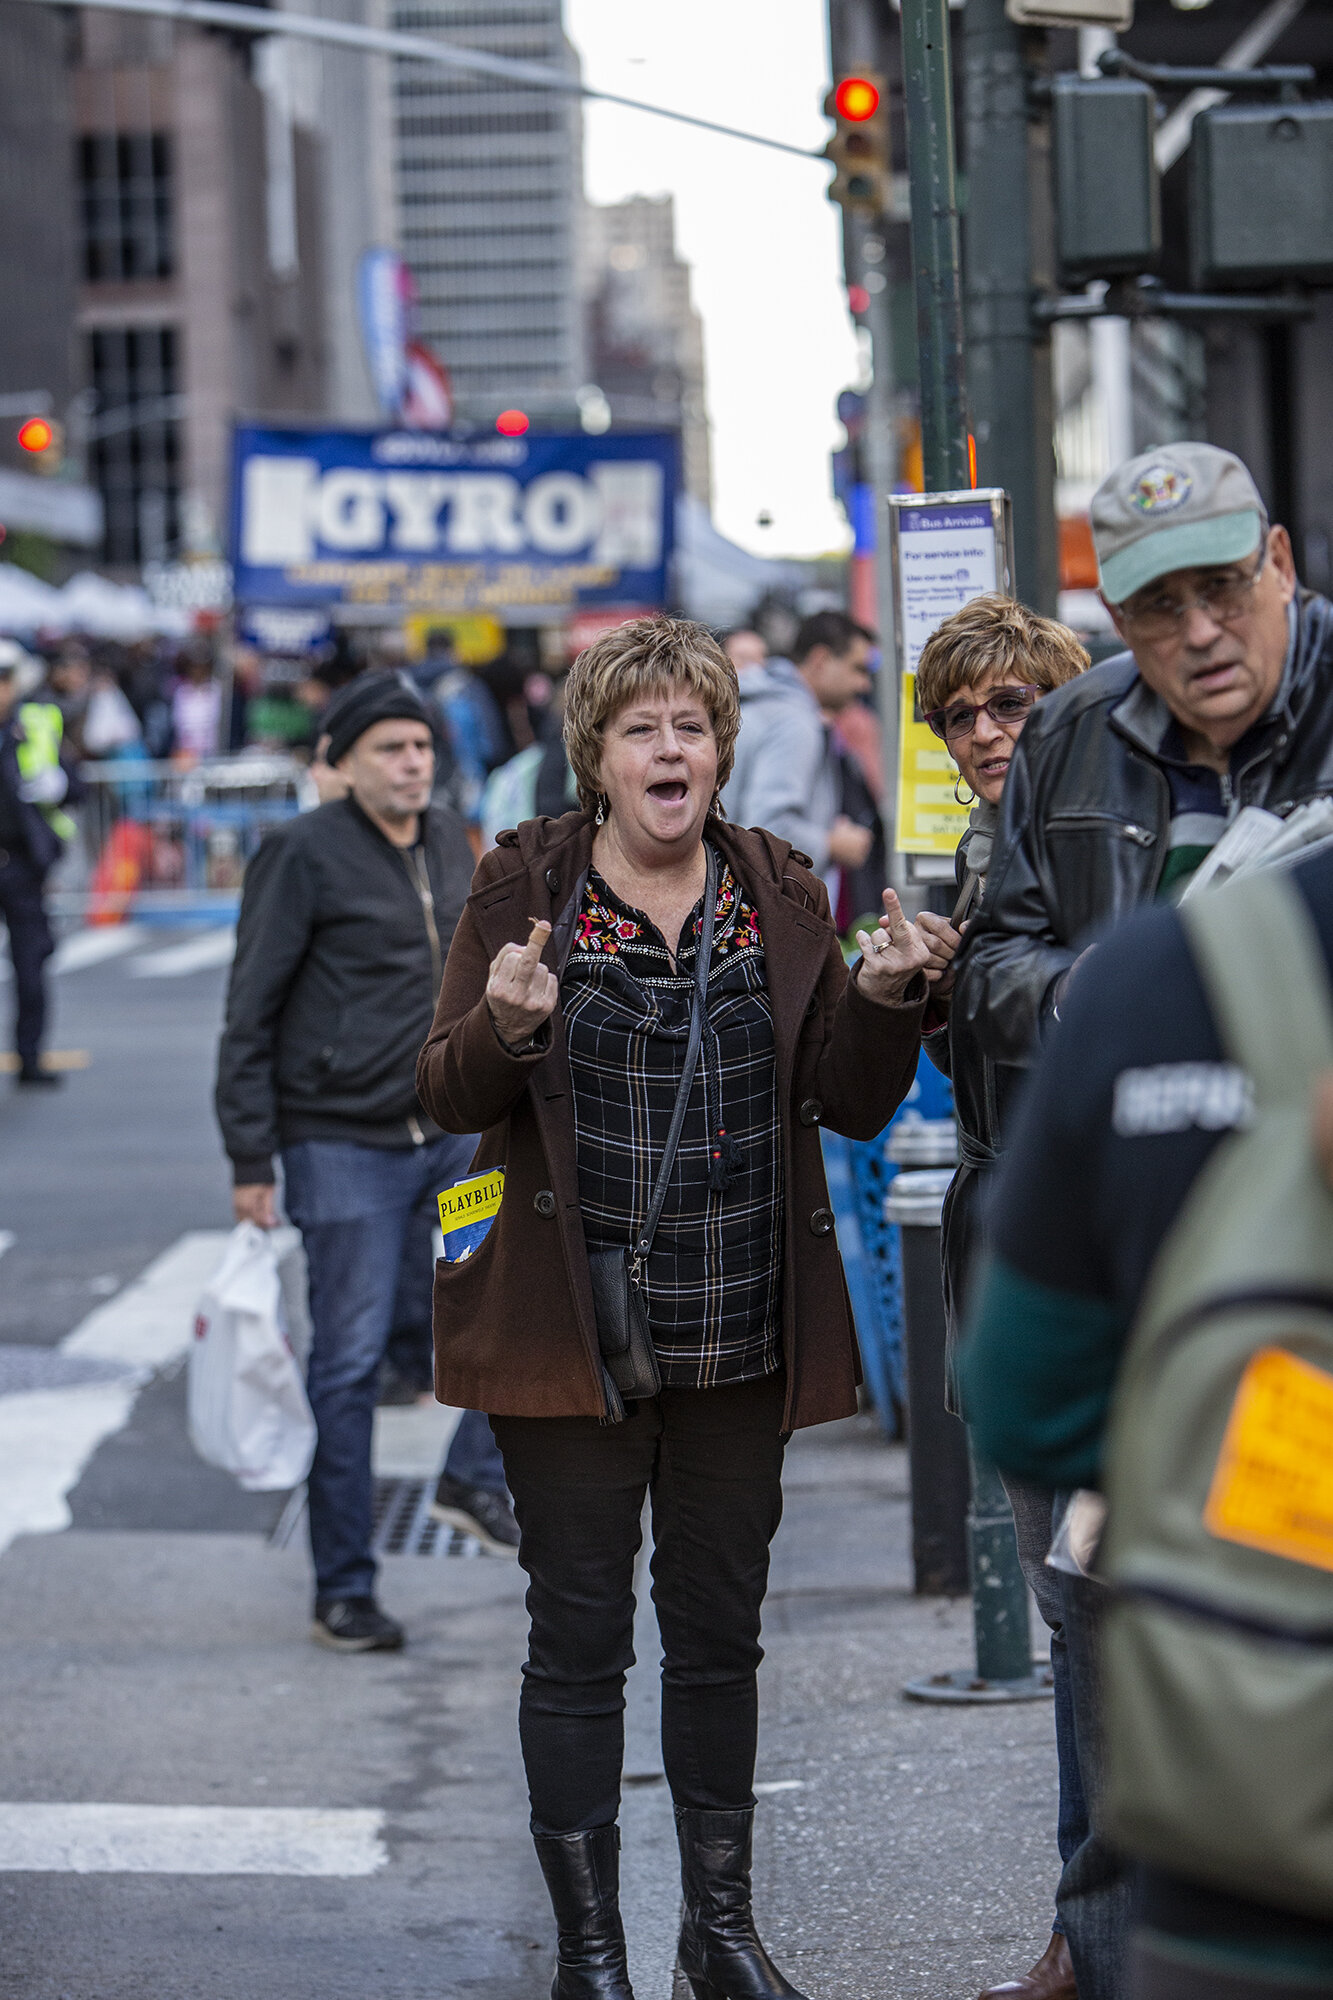 OUTNOW_Protest_2019_NYC-2951.jpg